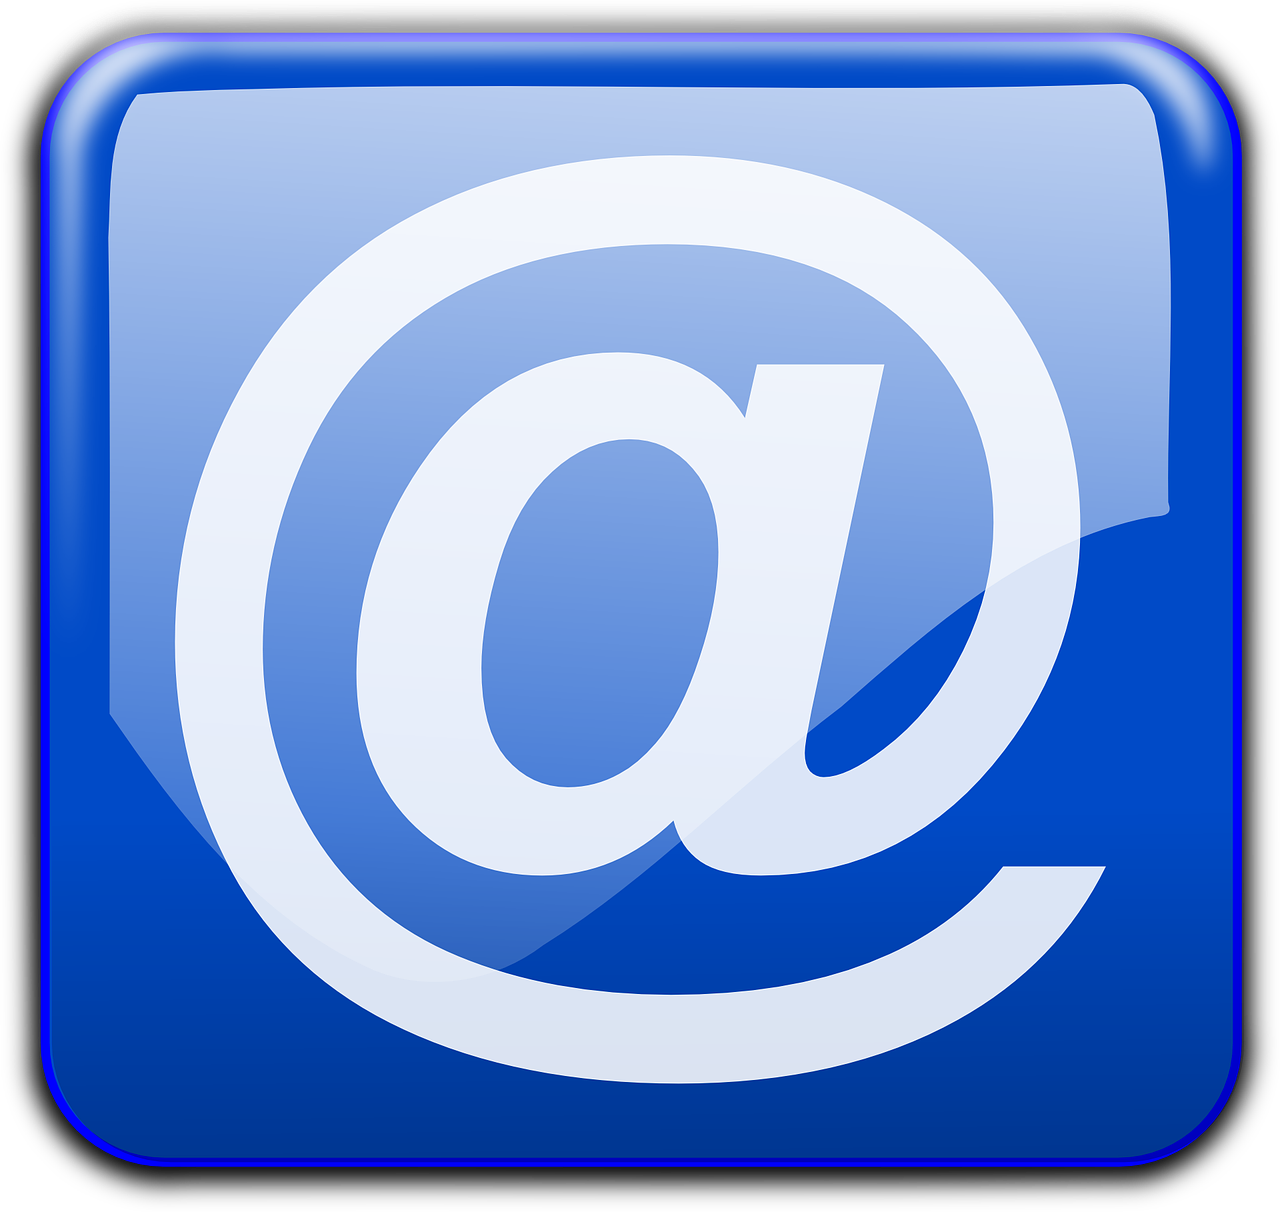 email address tag